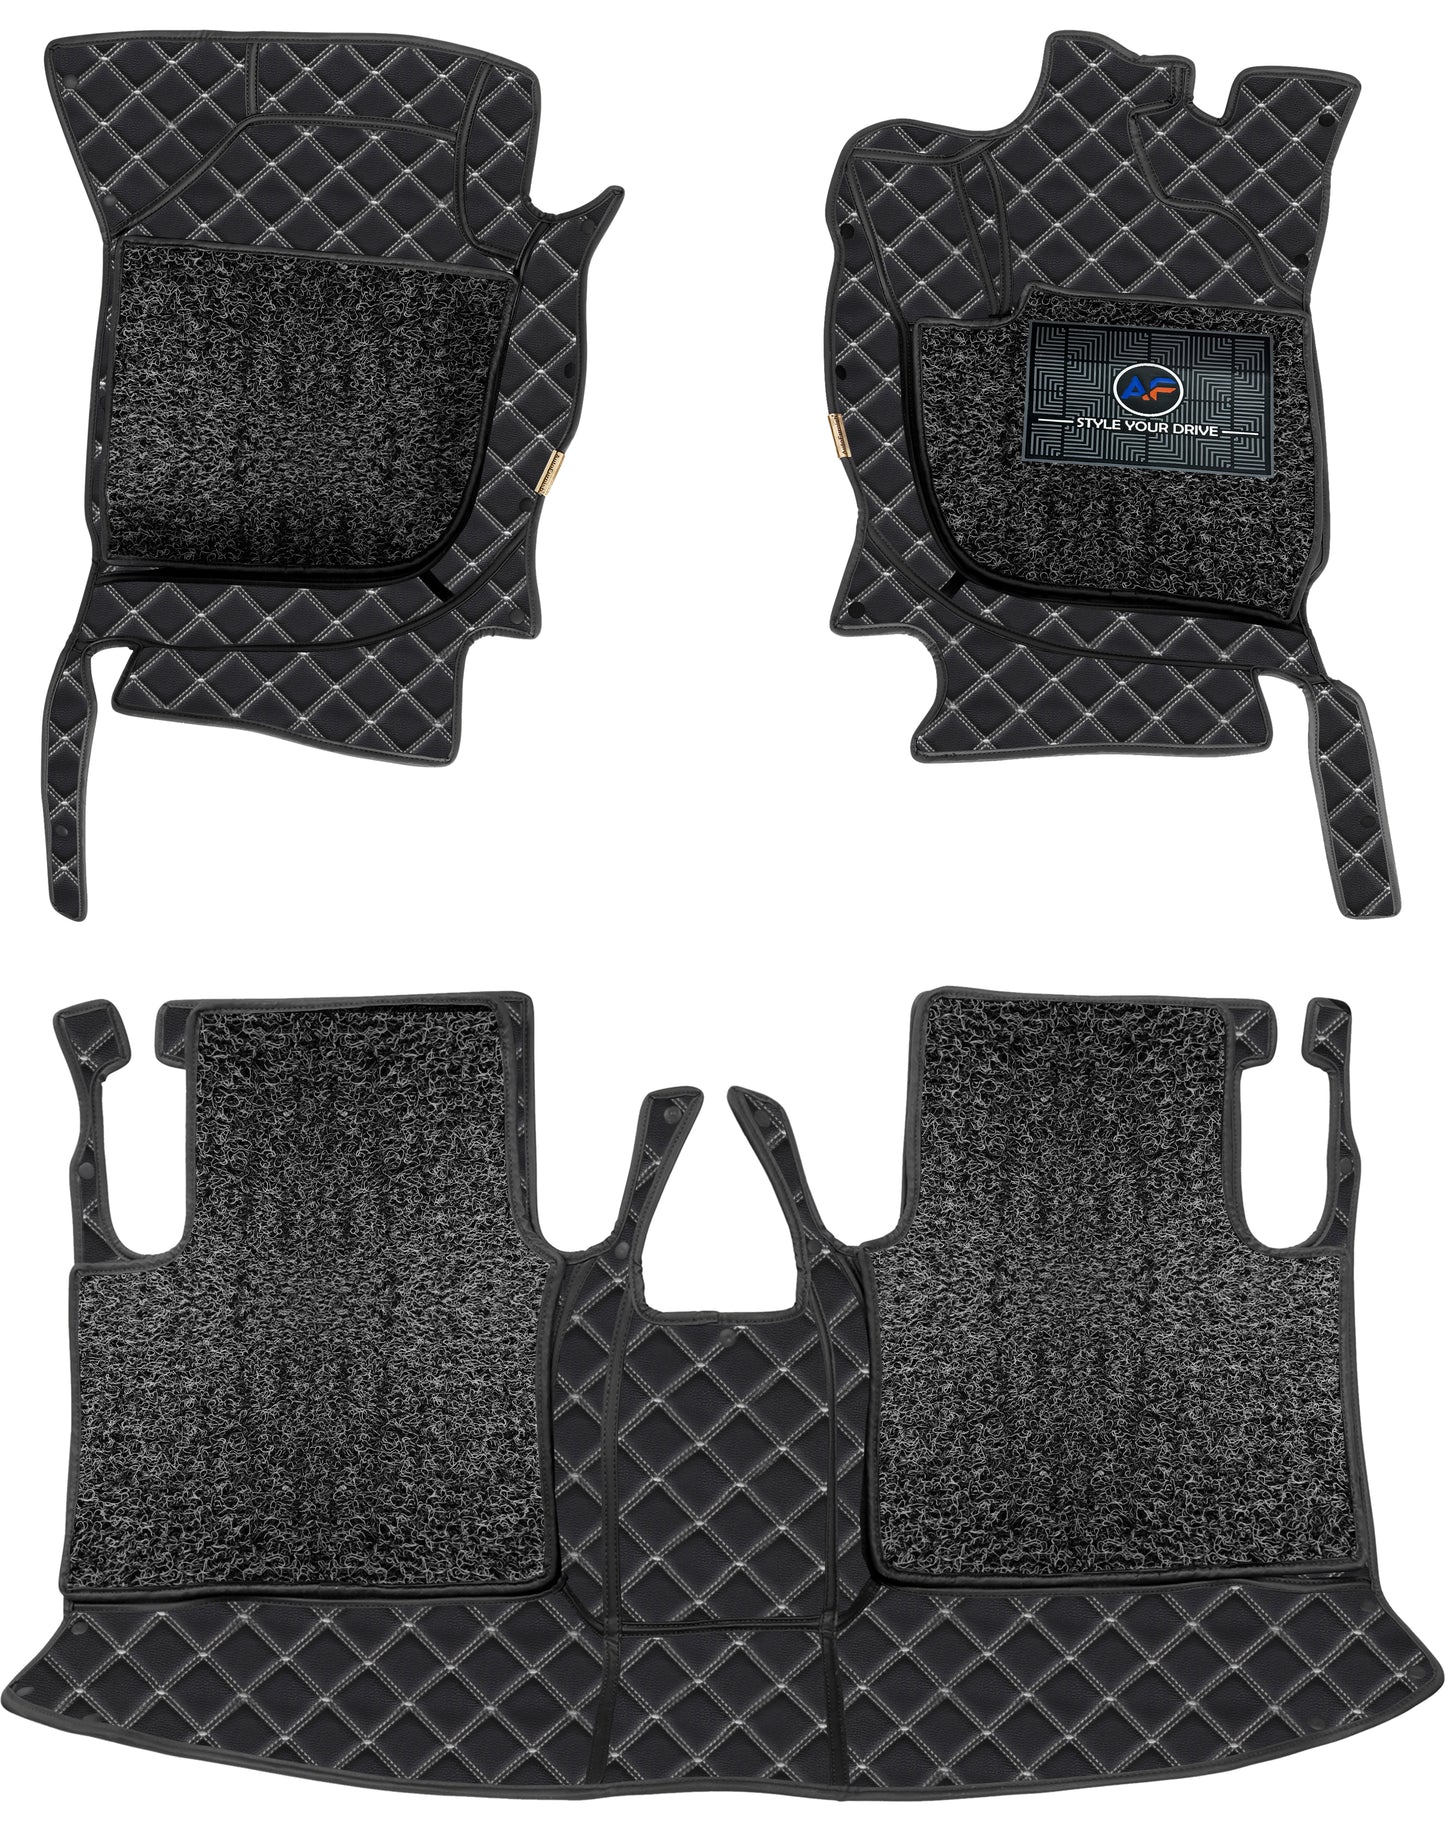 Mahindra XUV700 (5 Seater) 2021 7D Luxury Car Mat, All Weather Proof, Anti-Skid, 100% Waterproof & Odorless with Unique Diamond Fish Design (24mm Luxury PU Leather, 2 Rows)